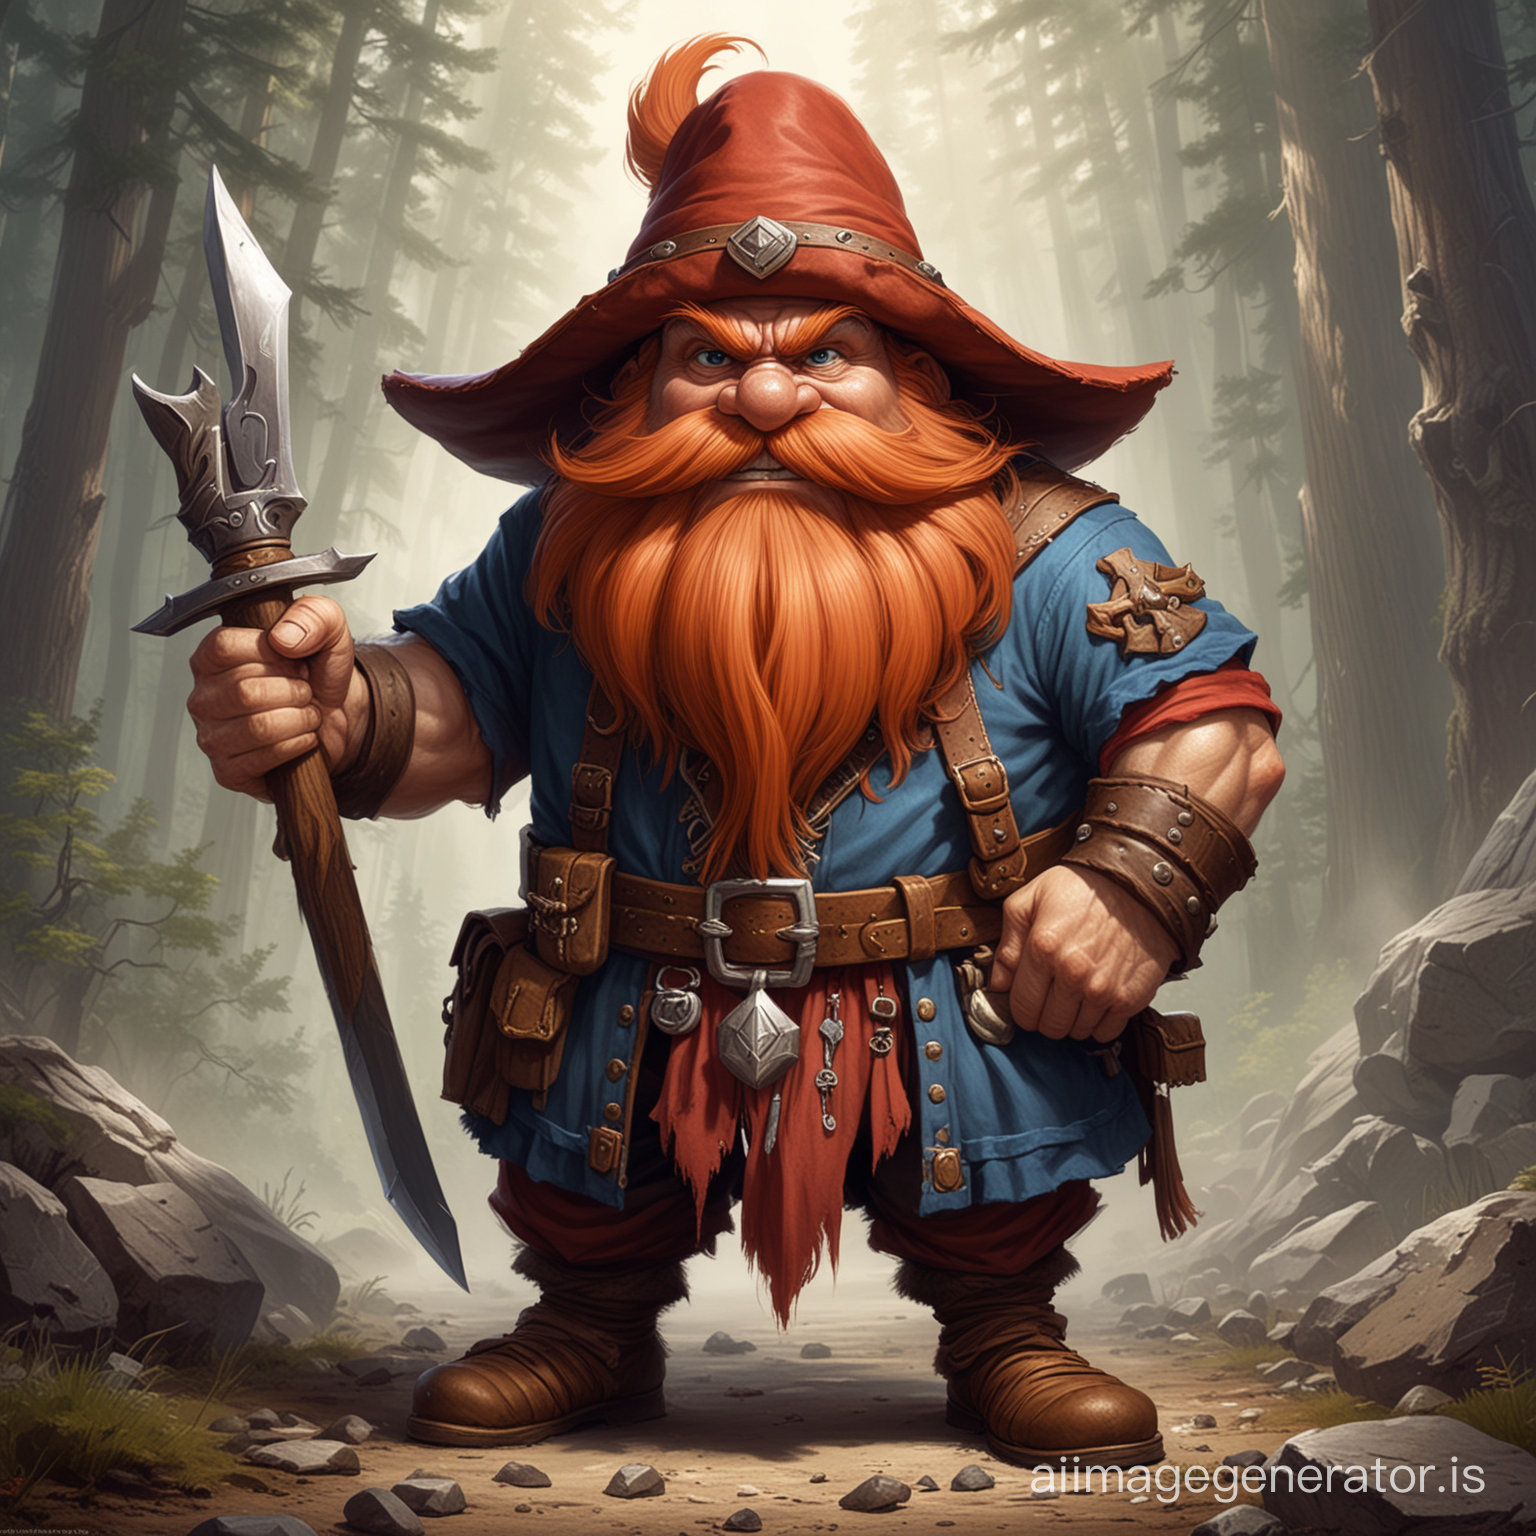 DnD fantasy style character of Yosemite Sam as a dwarf fighter